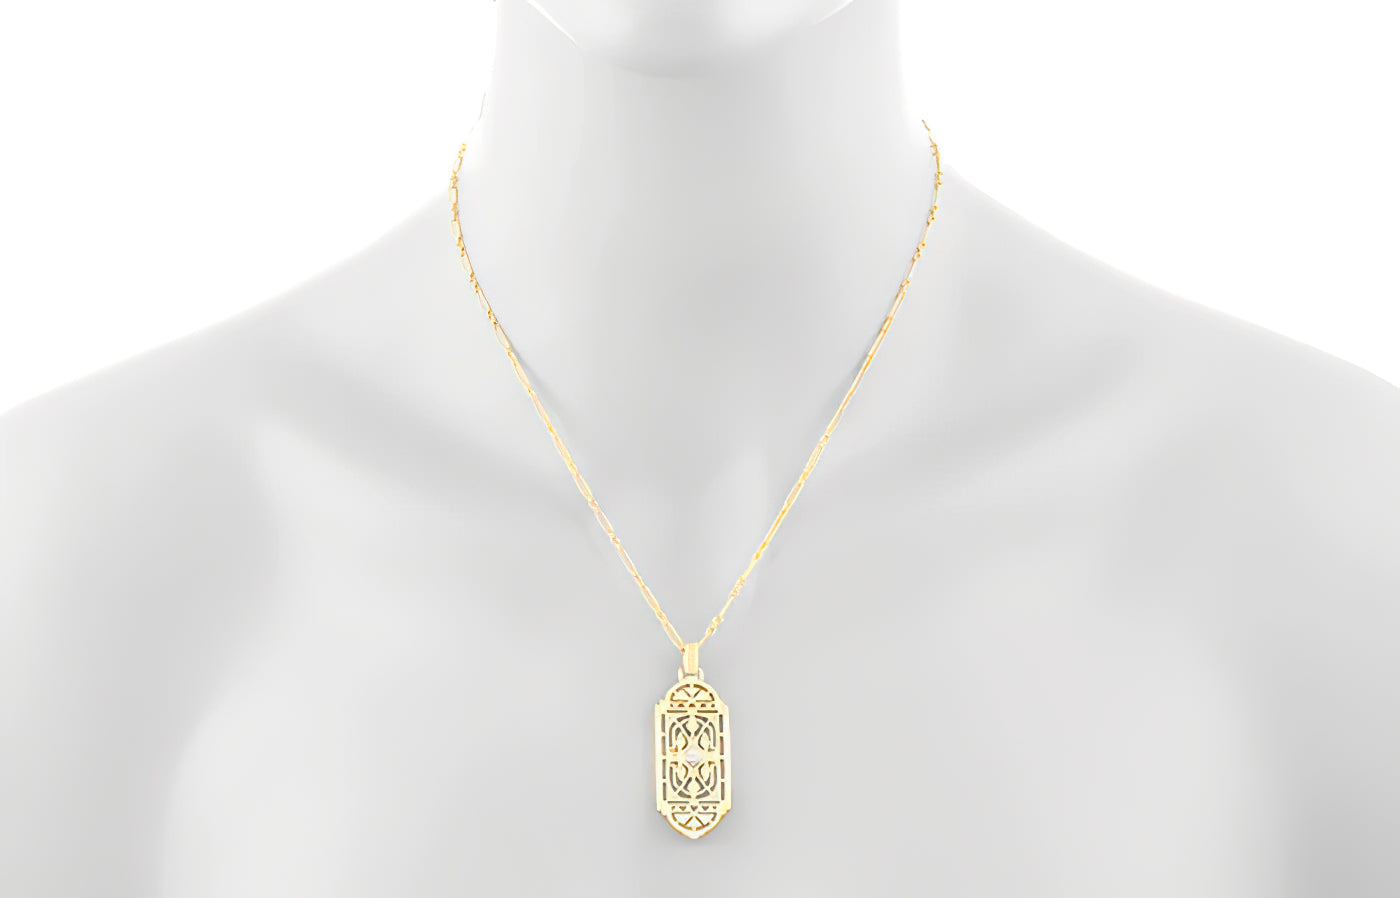 Geometric Art Deco Filigree White Sapphire Necklace Pendant in Yellow Gold Over Solid Sterling Silver - Item: N150YWS - Image: 4